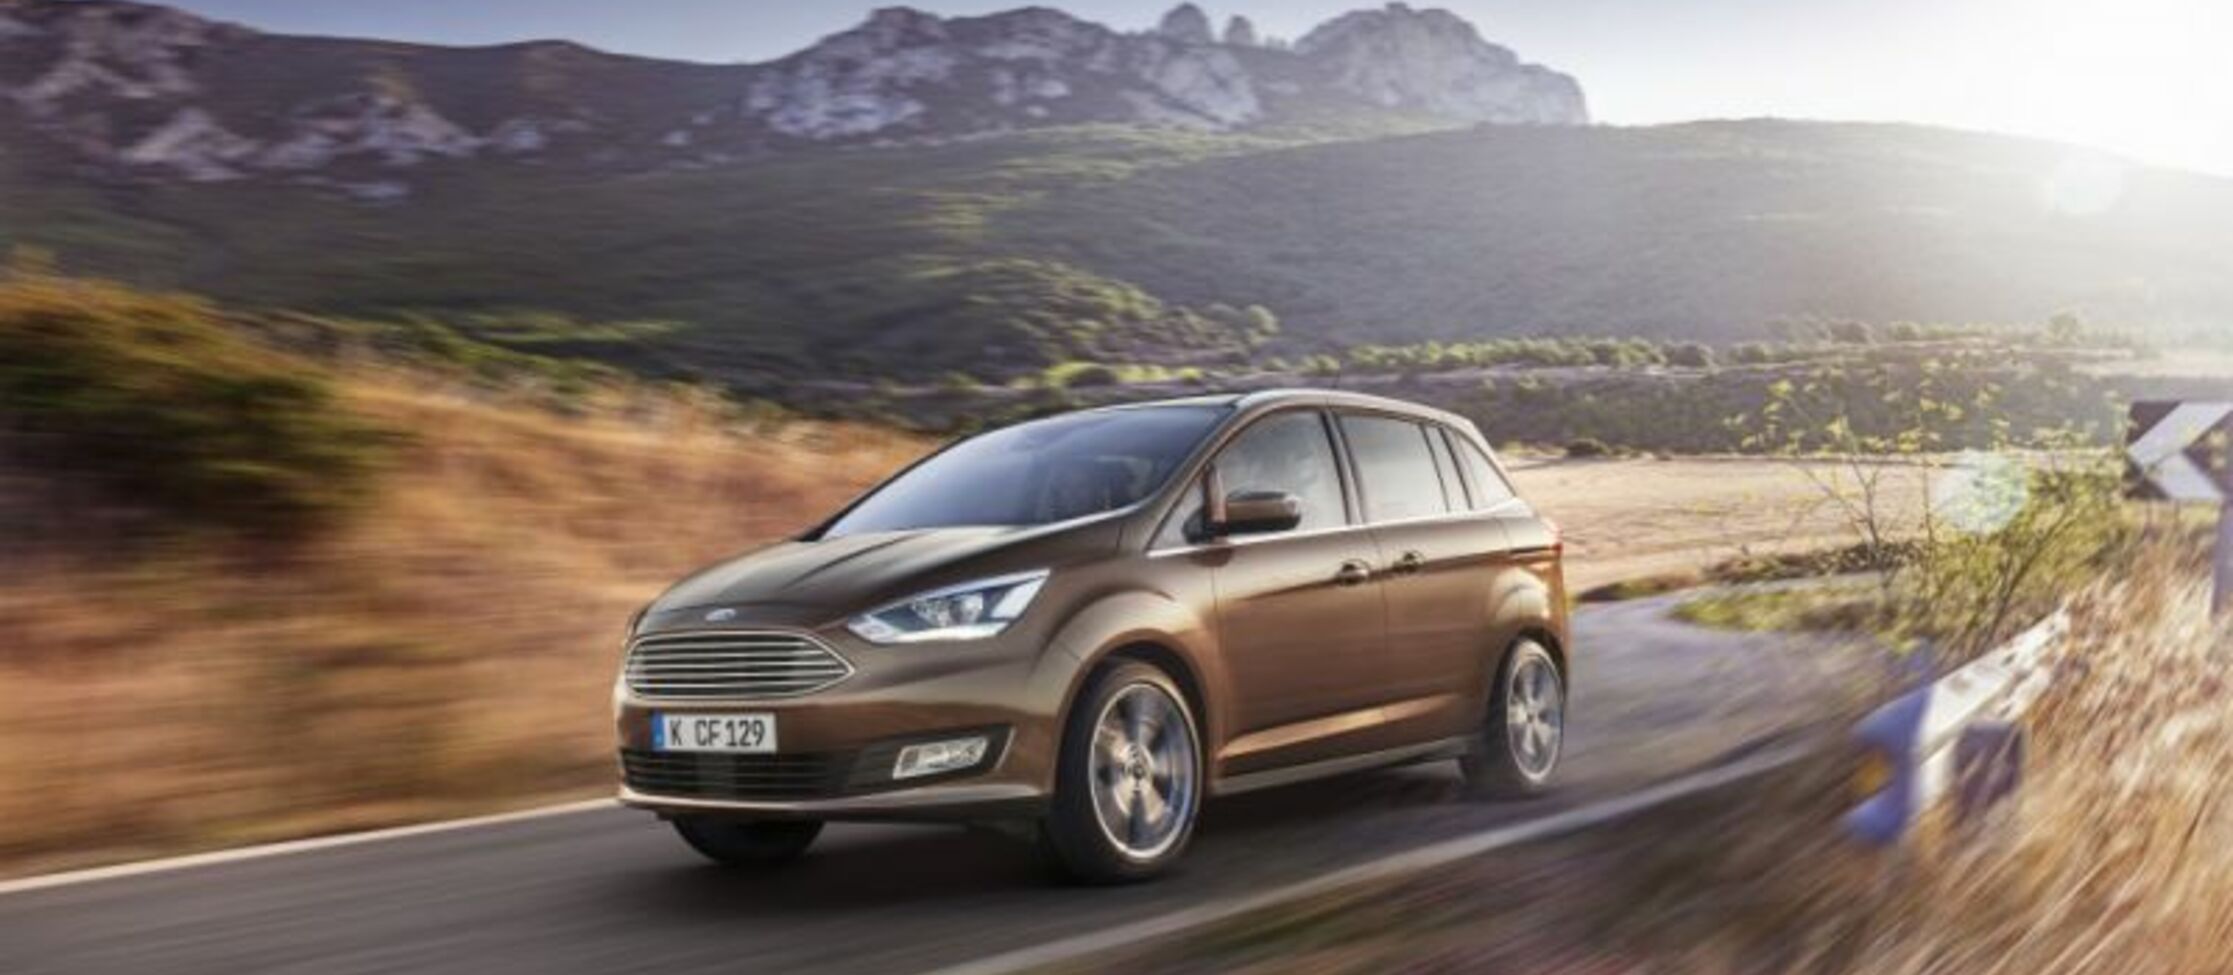 Ford Grand C-MAX (facelift 2015) 1.5 TDCi (95 Hp) S&S 2015, 2016, 2017, 2018, 2019, 2020, 2021